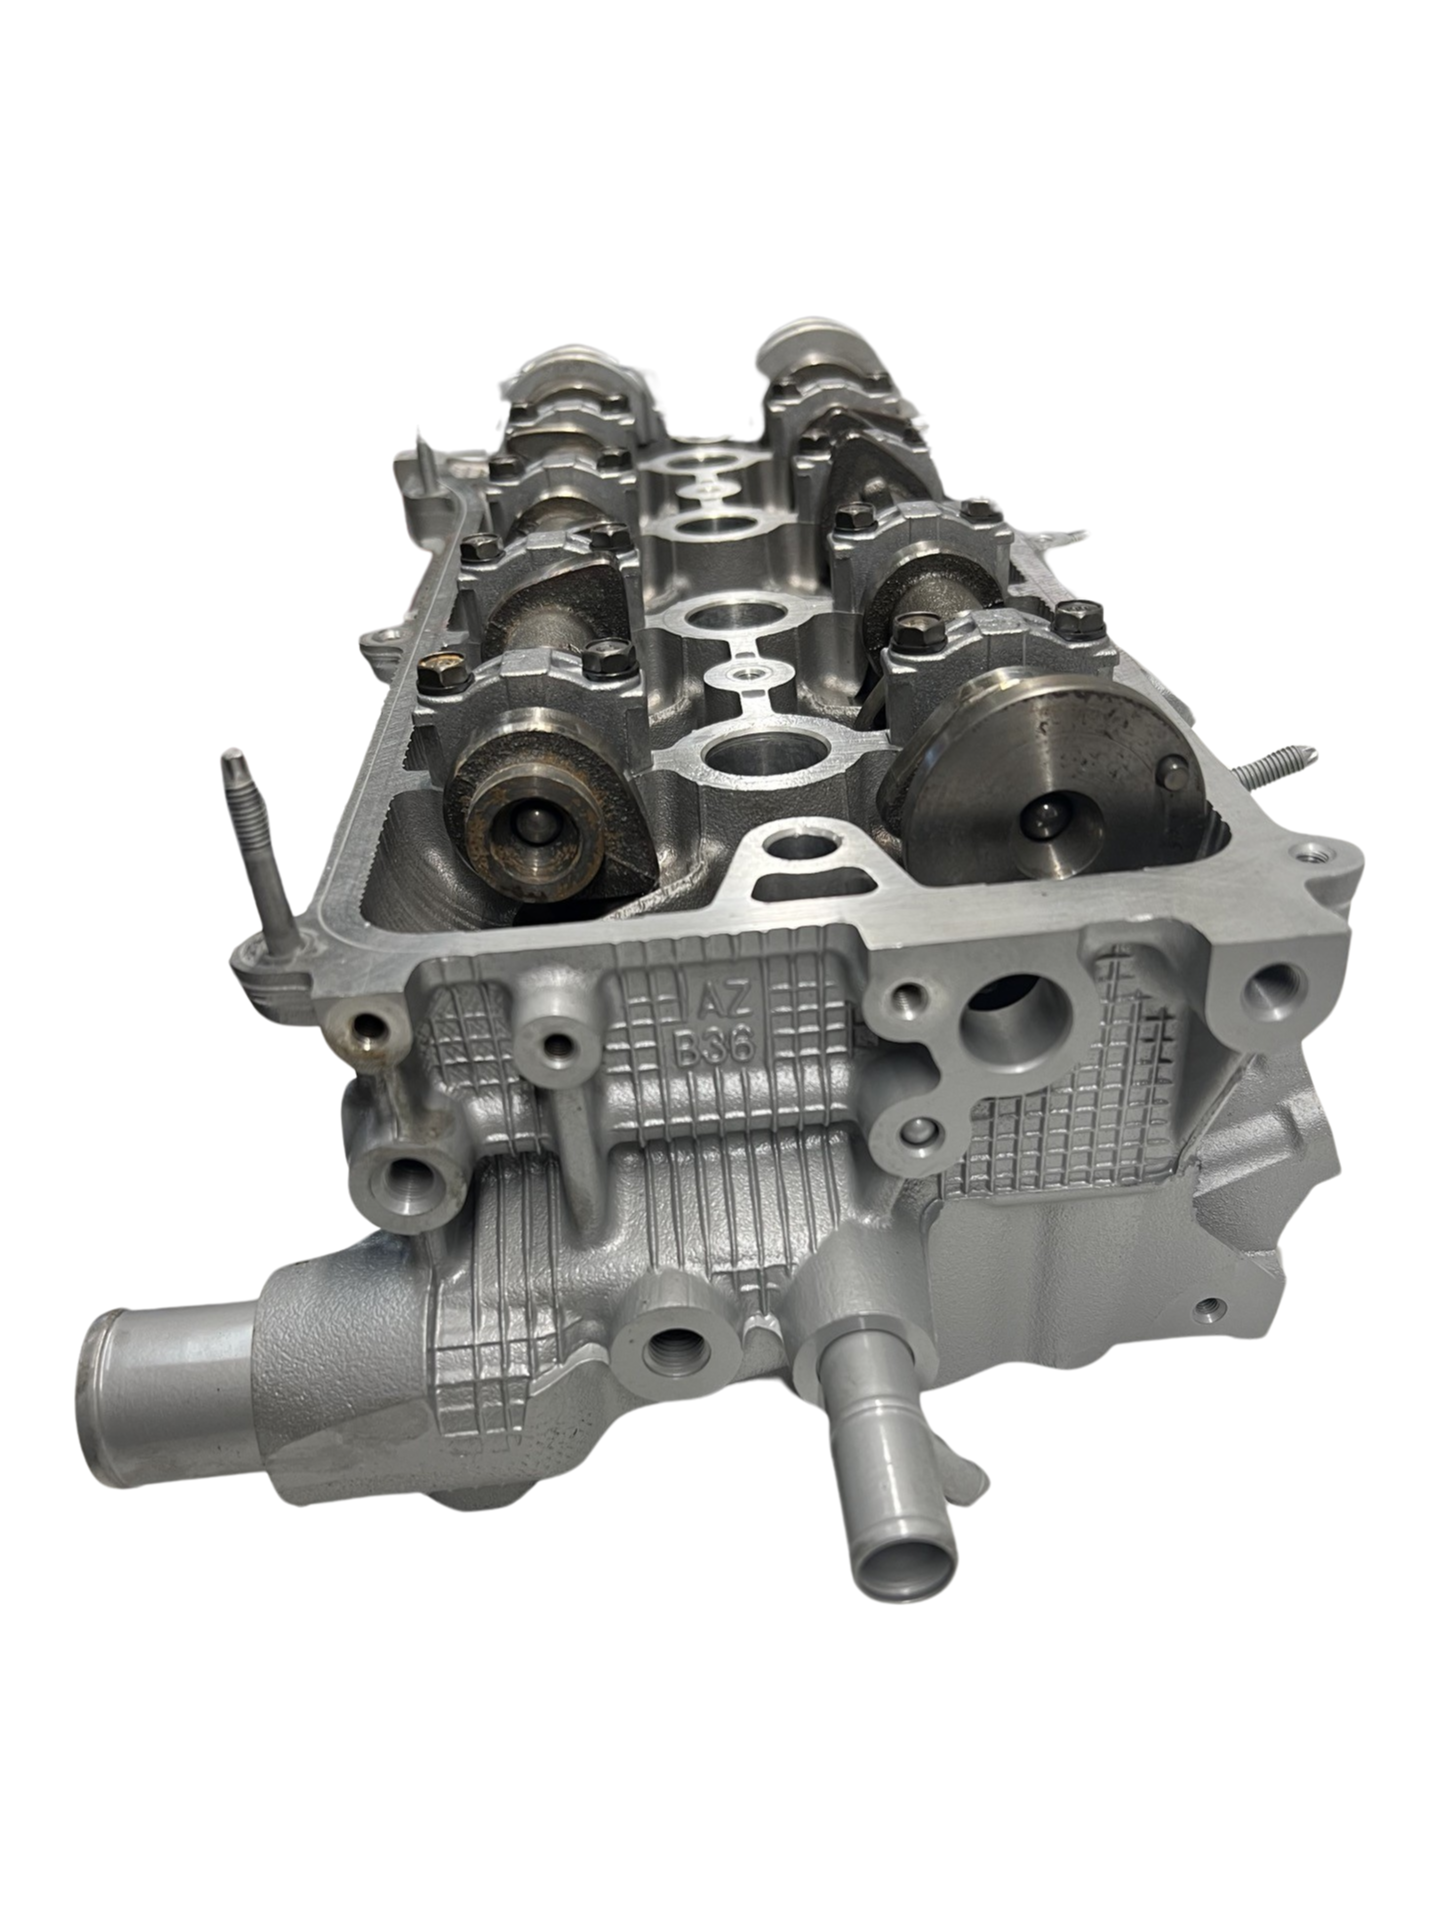 Rear view of cylinder head for a Toyota 2.4L DOHC 2AZ-FE